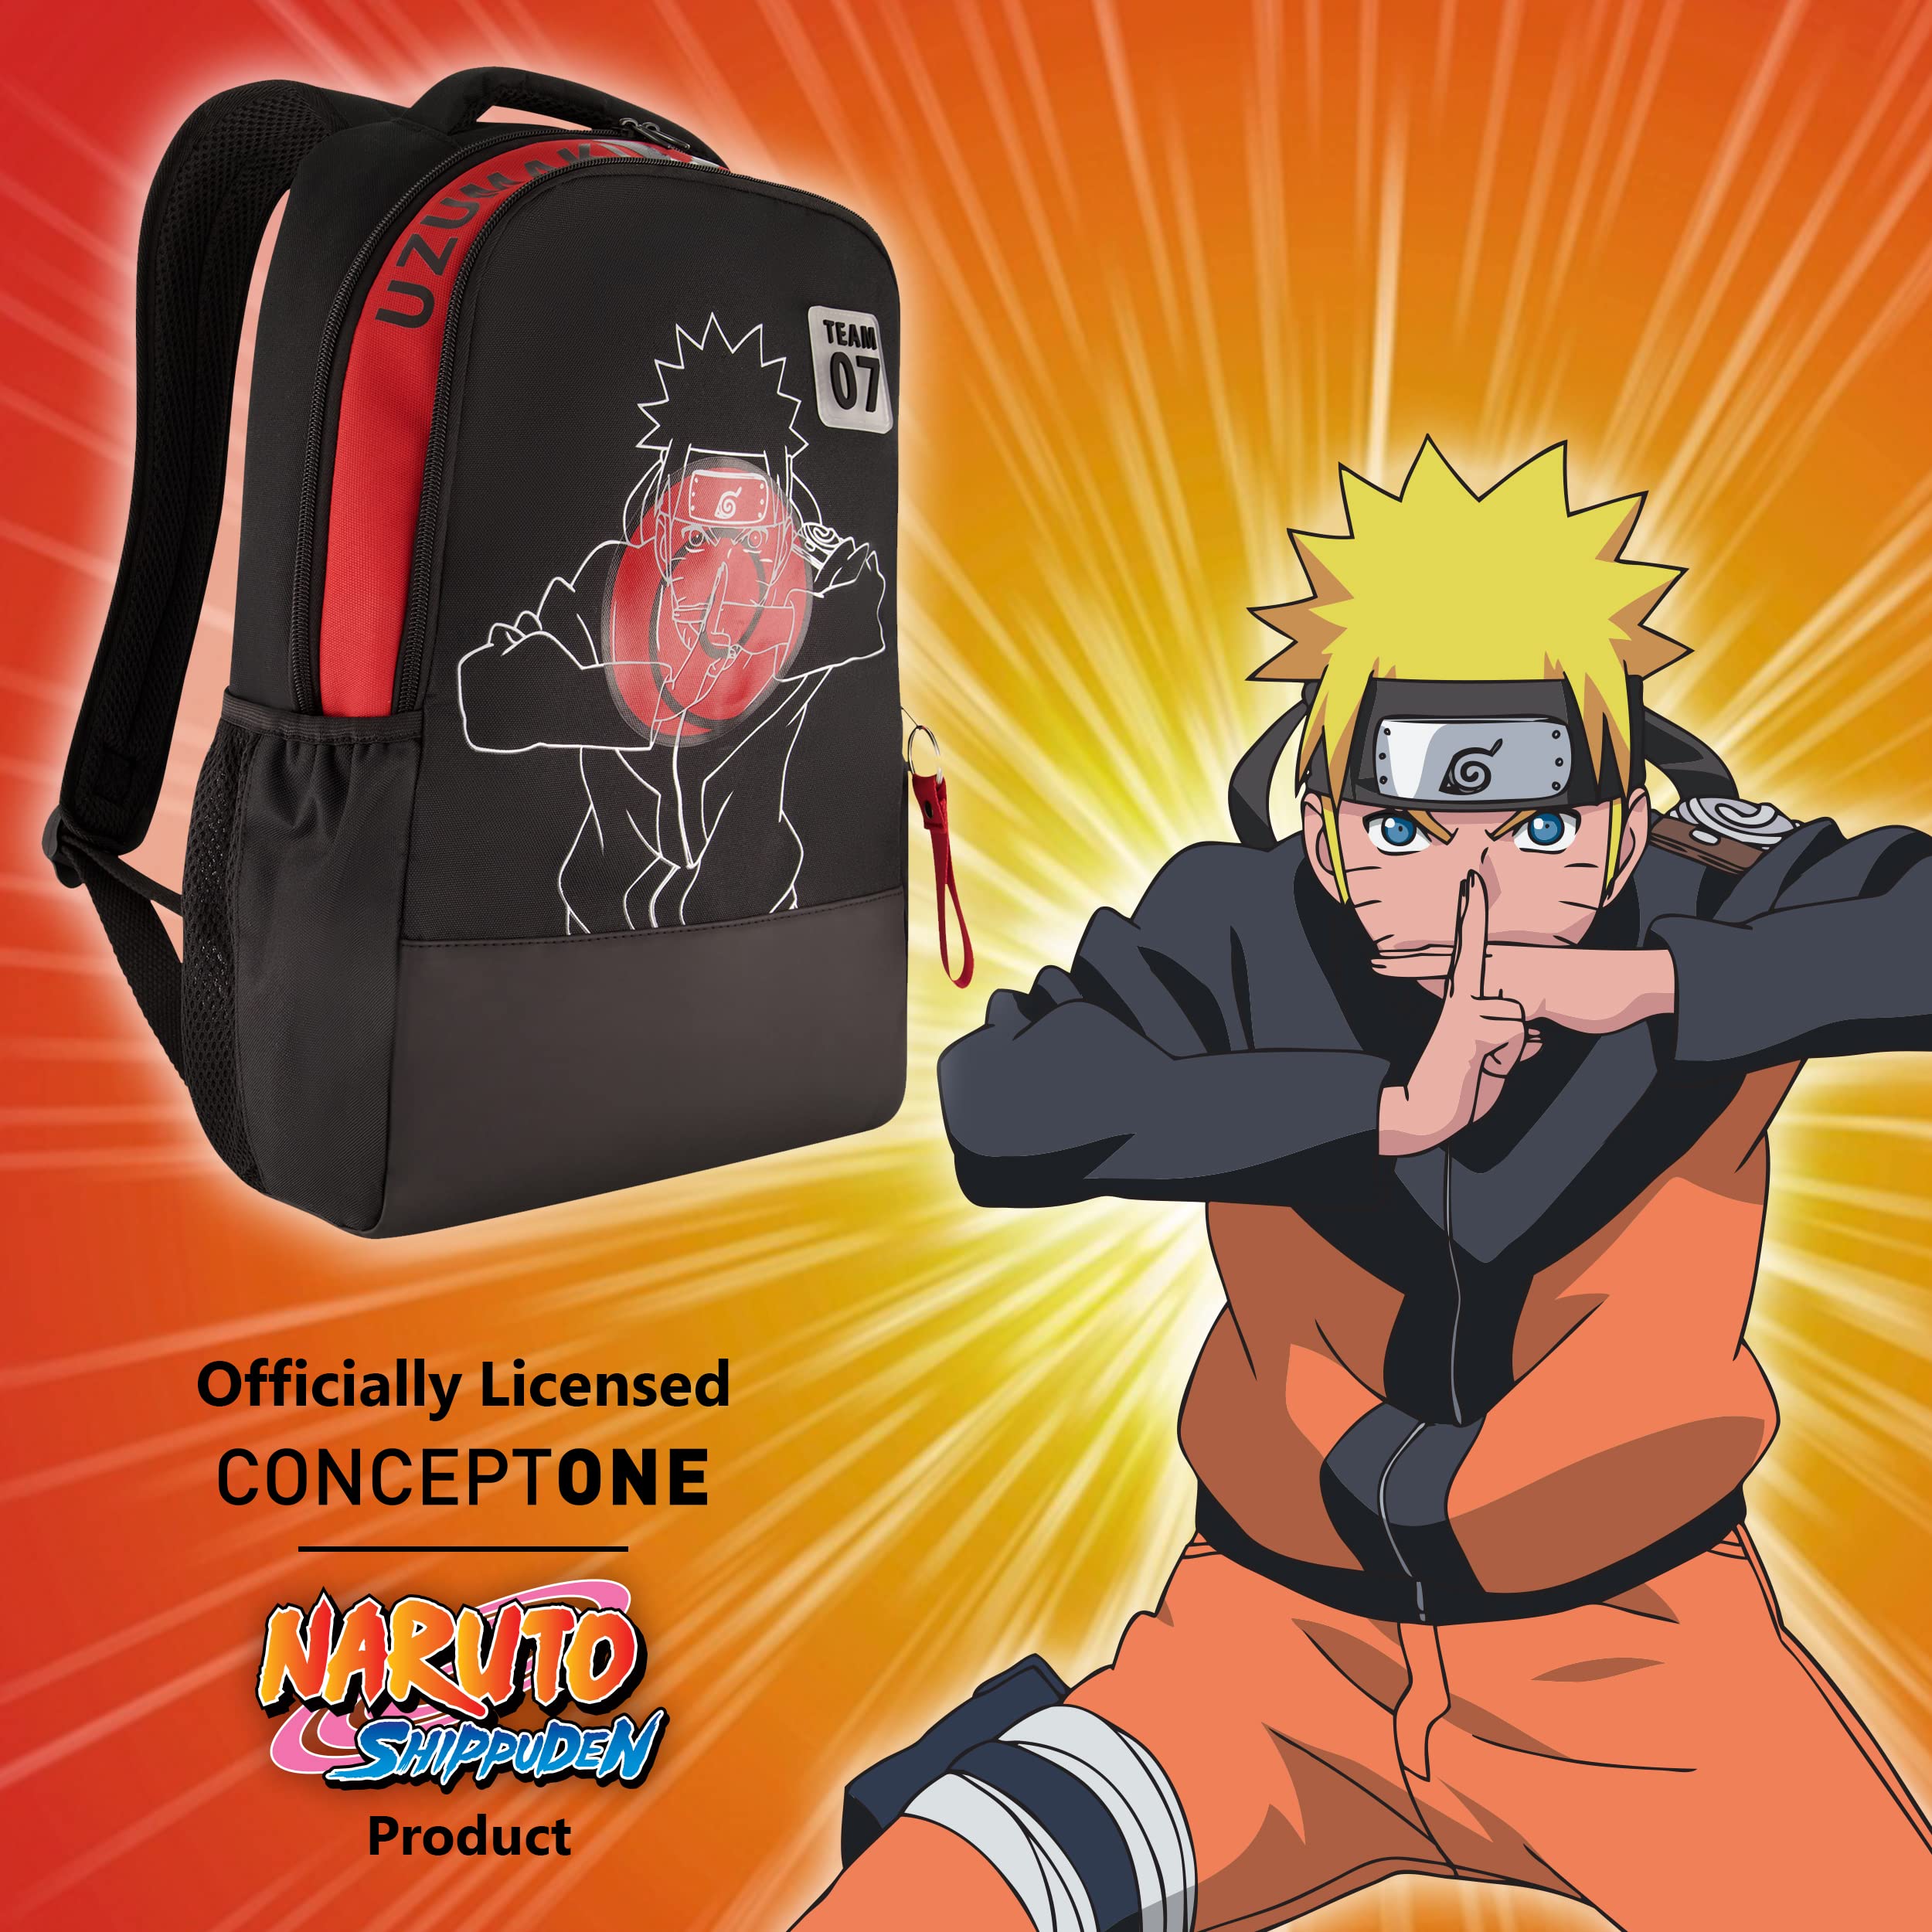 Naruto 15 Inch Sleeve Laptop Backpack, Padded Computer Bag for Commute or Travel, Team 7, One Size